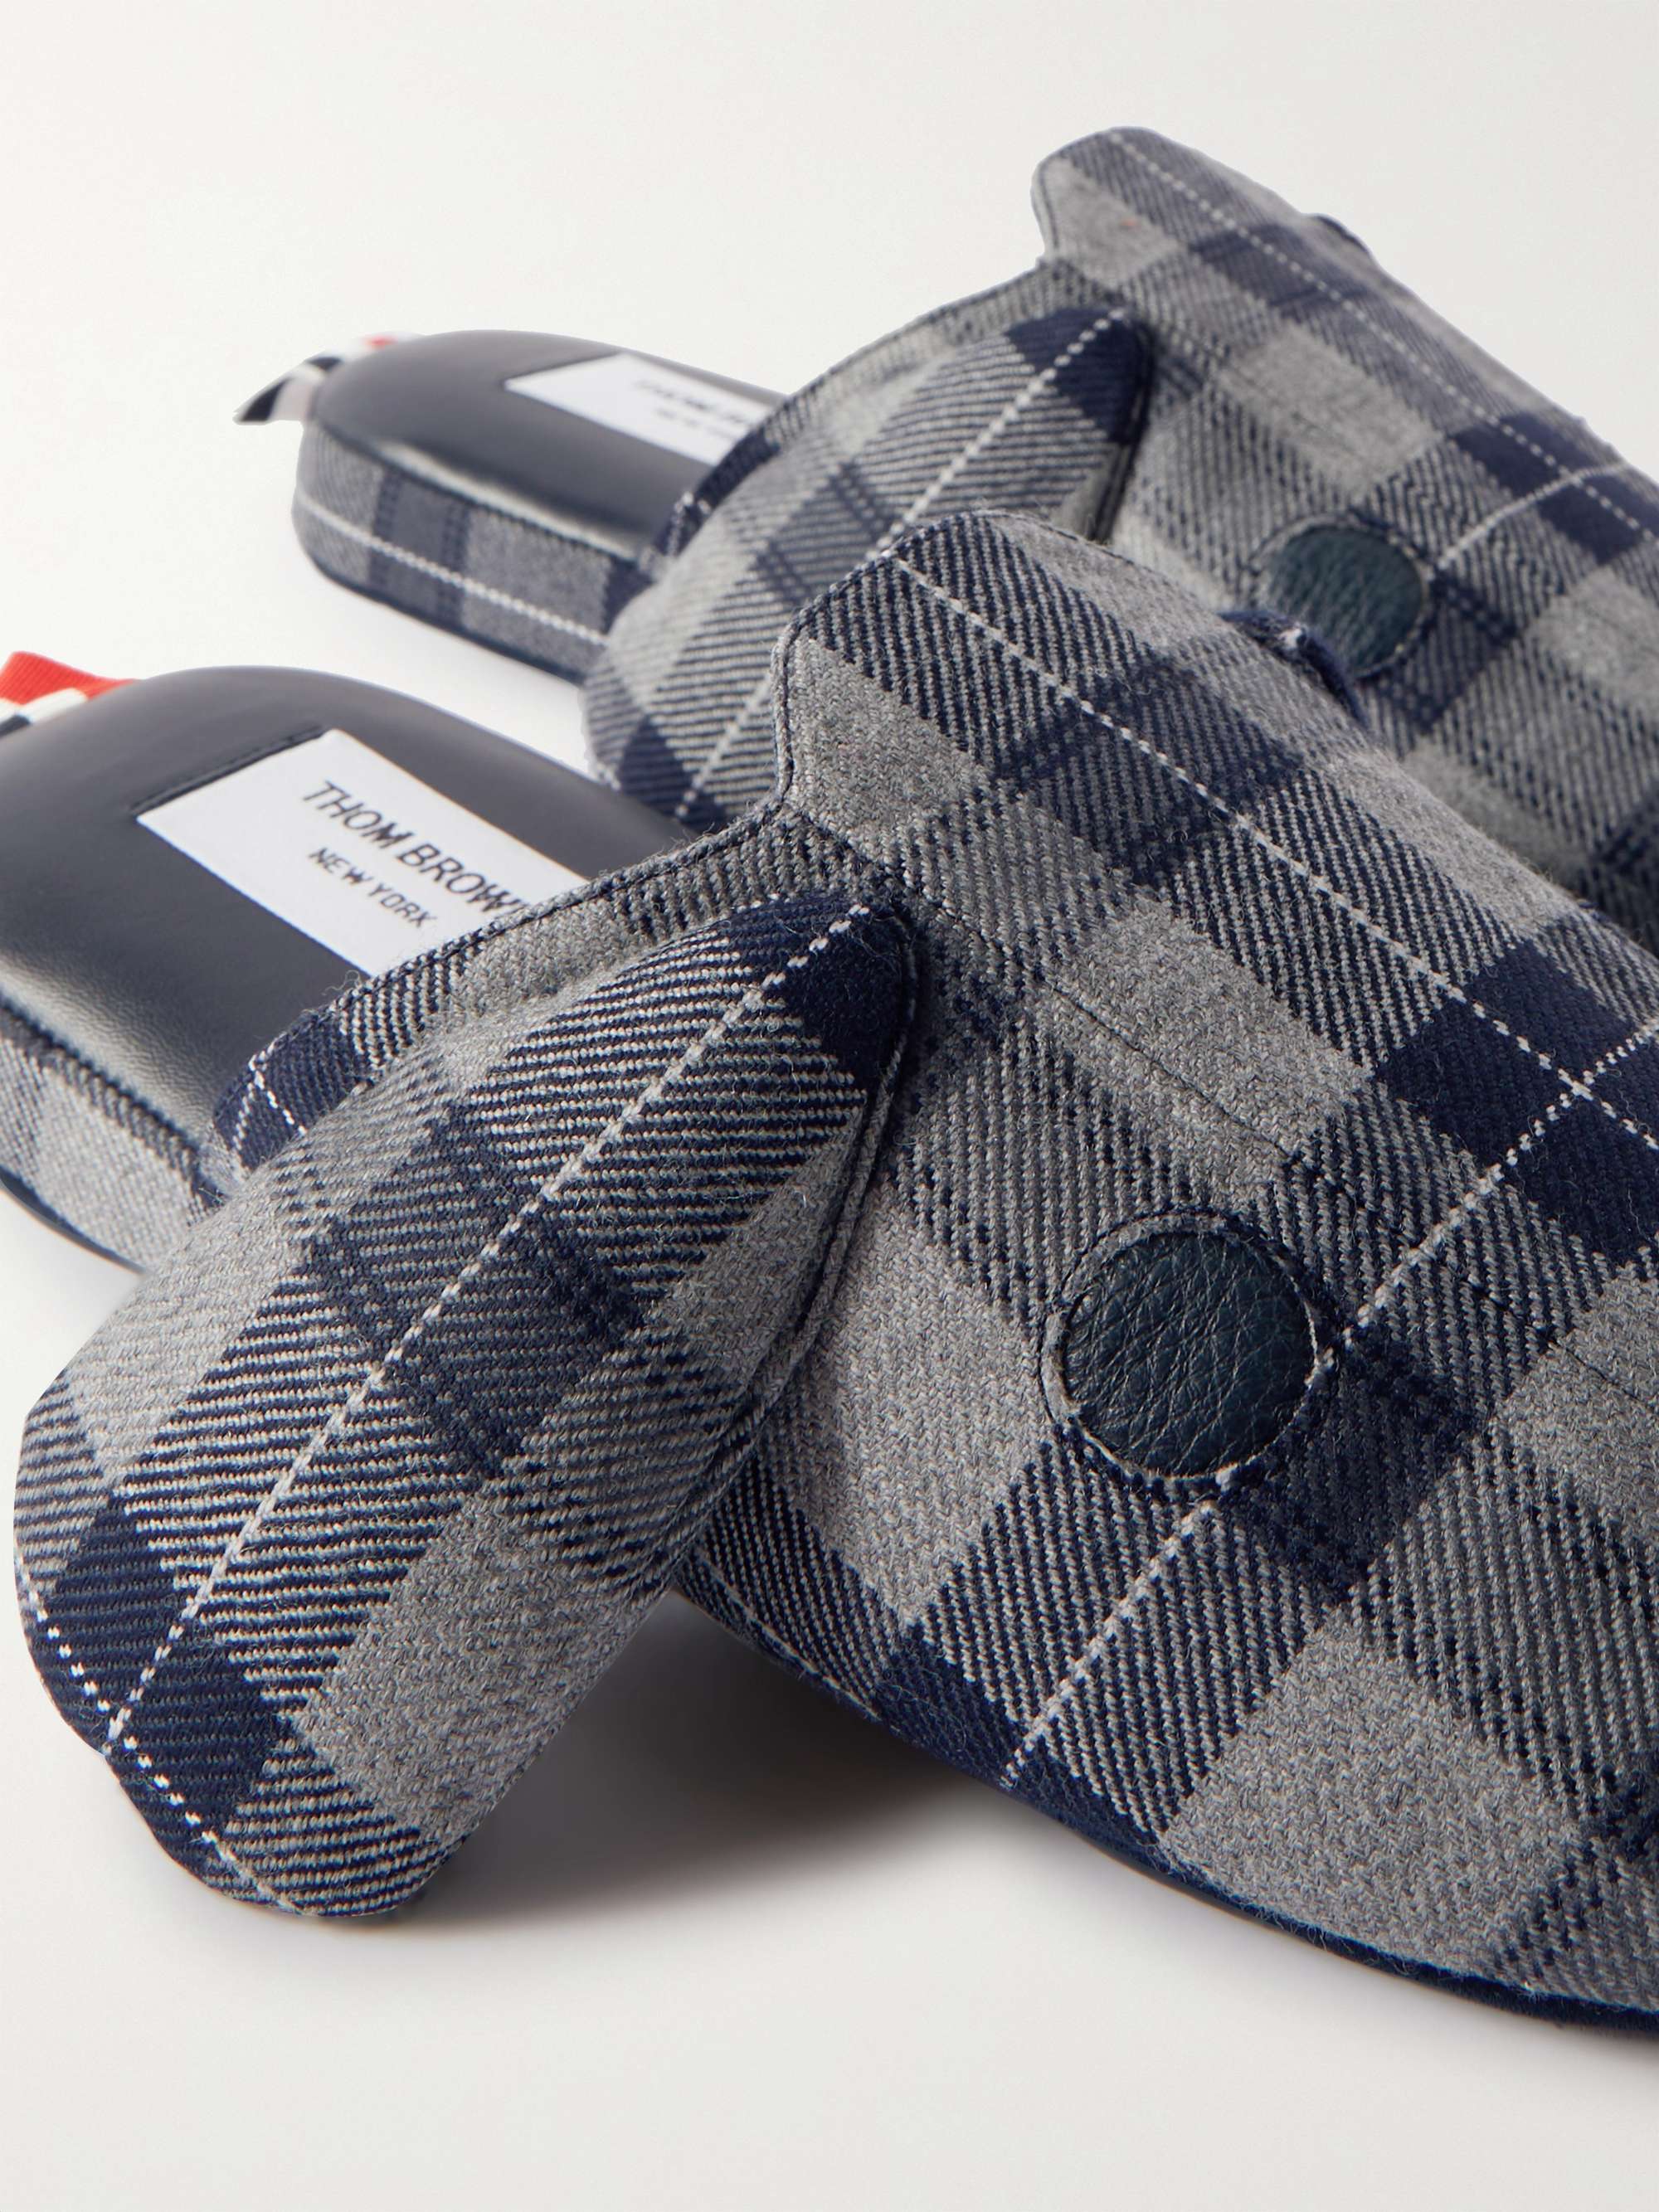 THOM BROWNE Hector Leather-Trimmed Checked Wool-Flannel Slippers